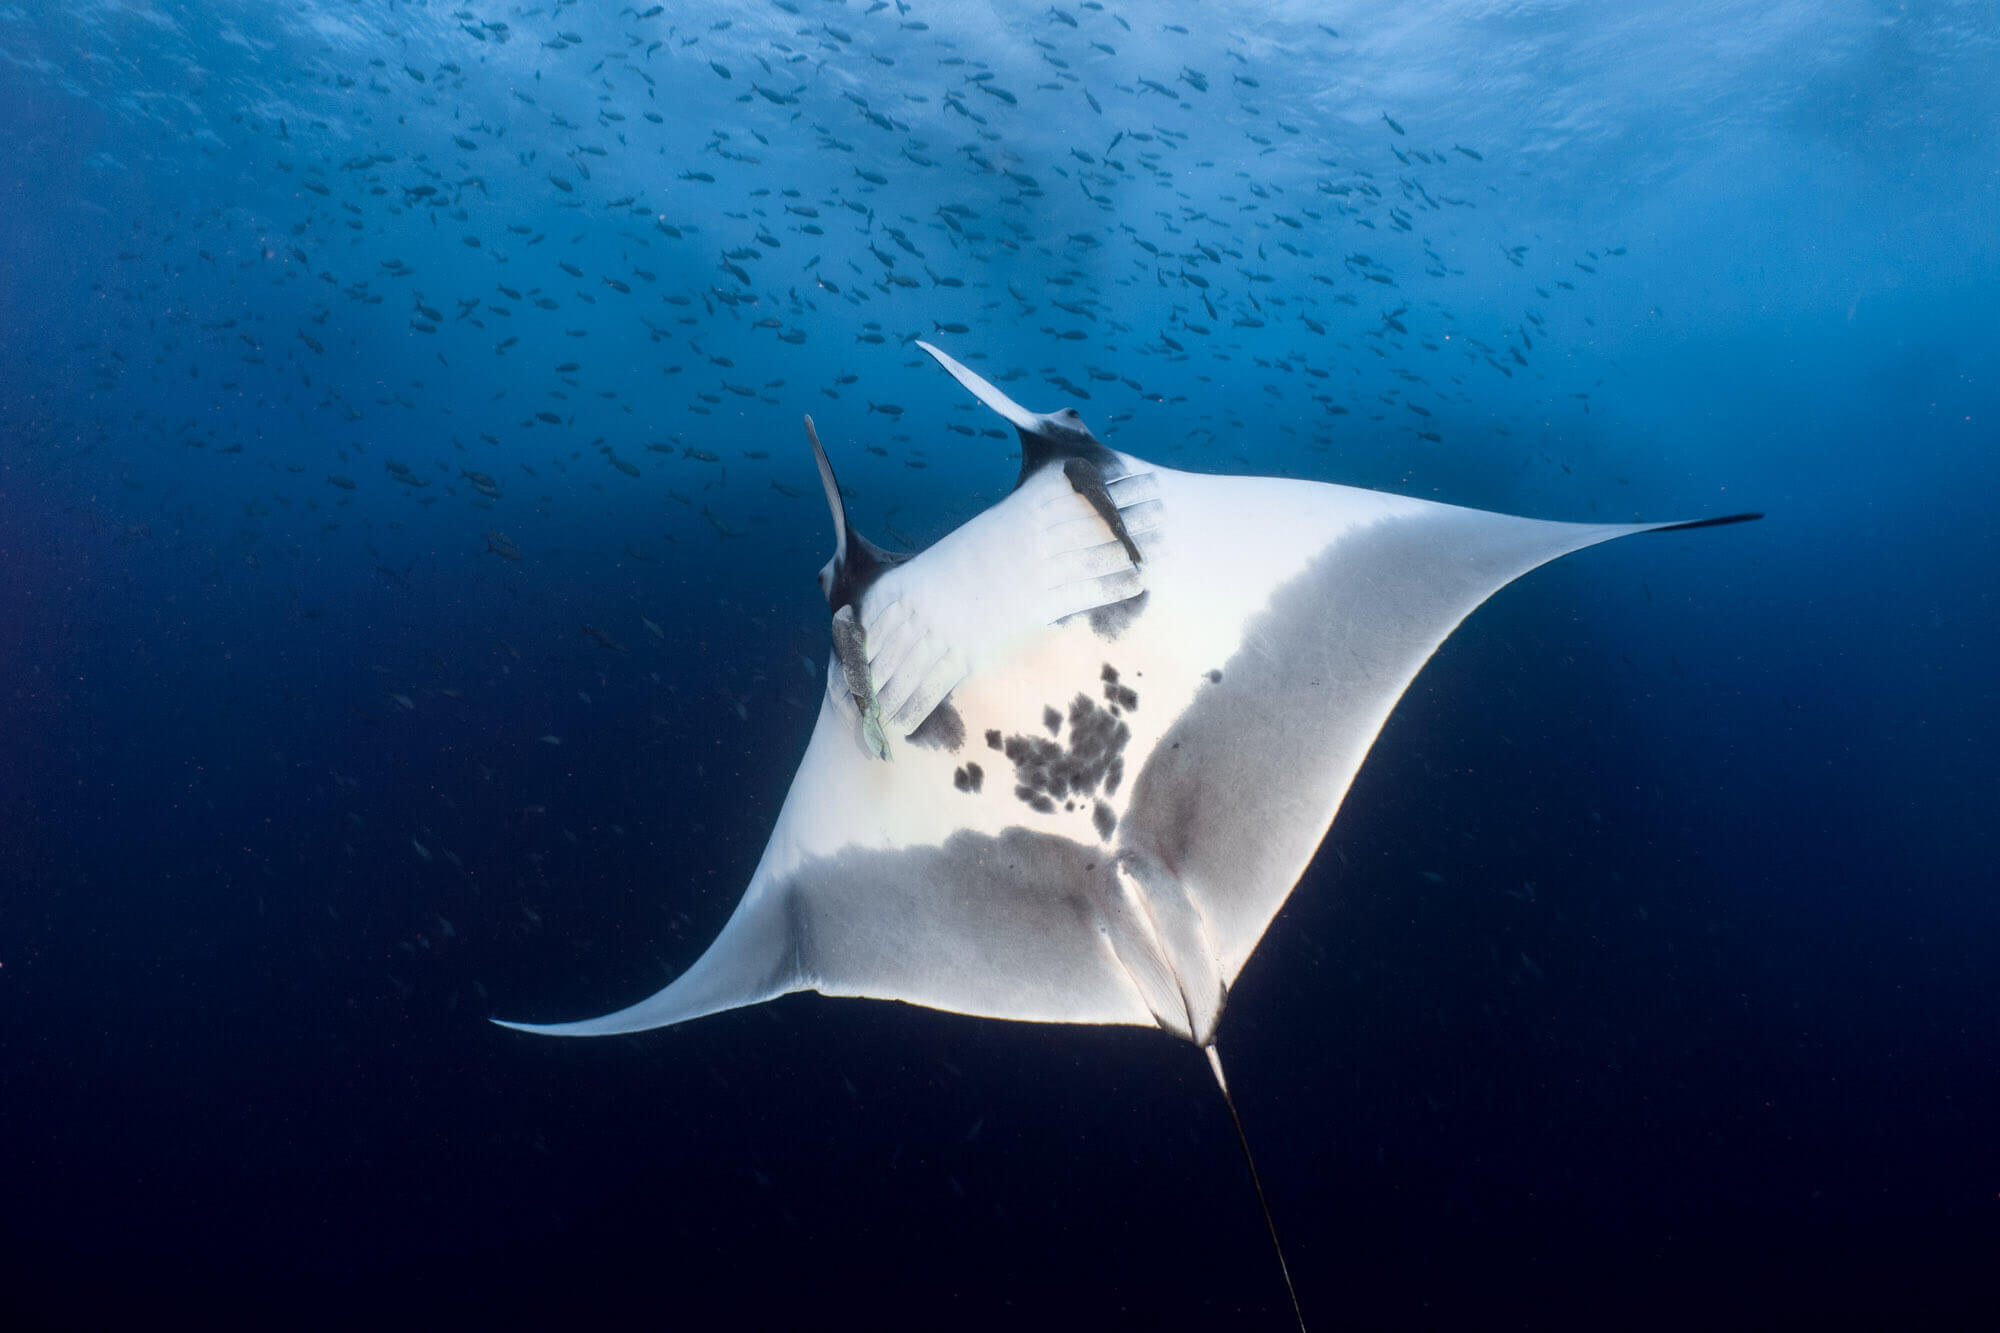 A giant oceanic manta ray shows her belly at Roca Partida, Revillagigedo Islands